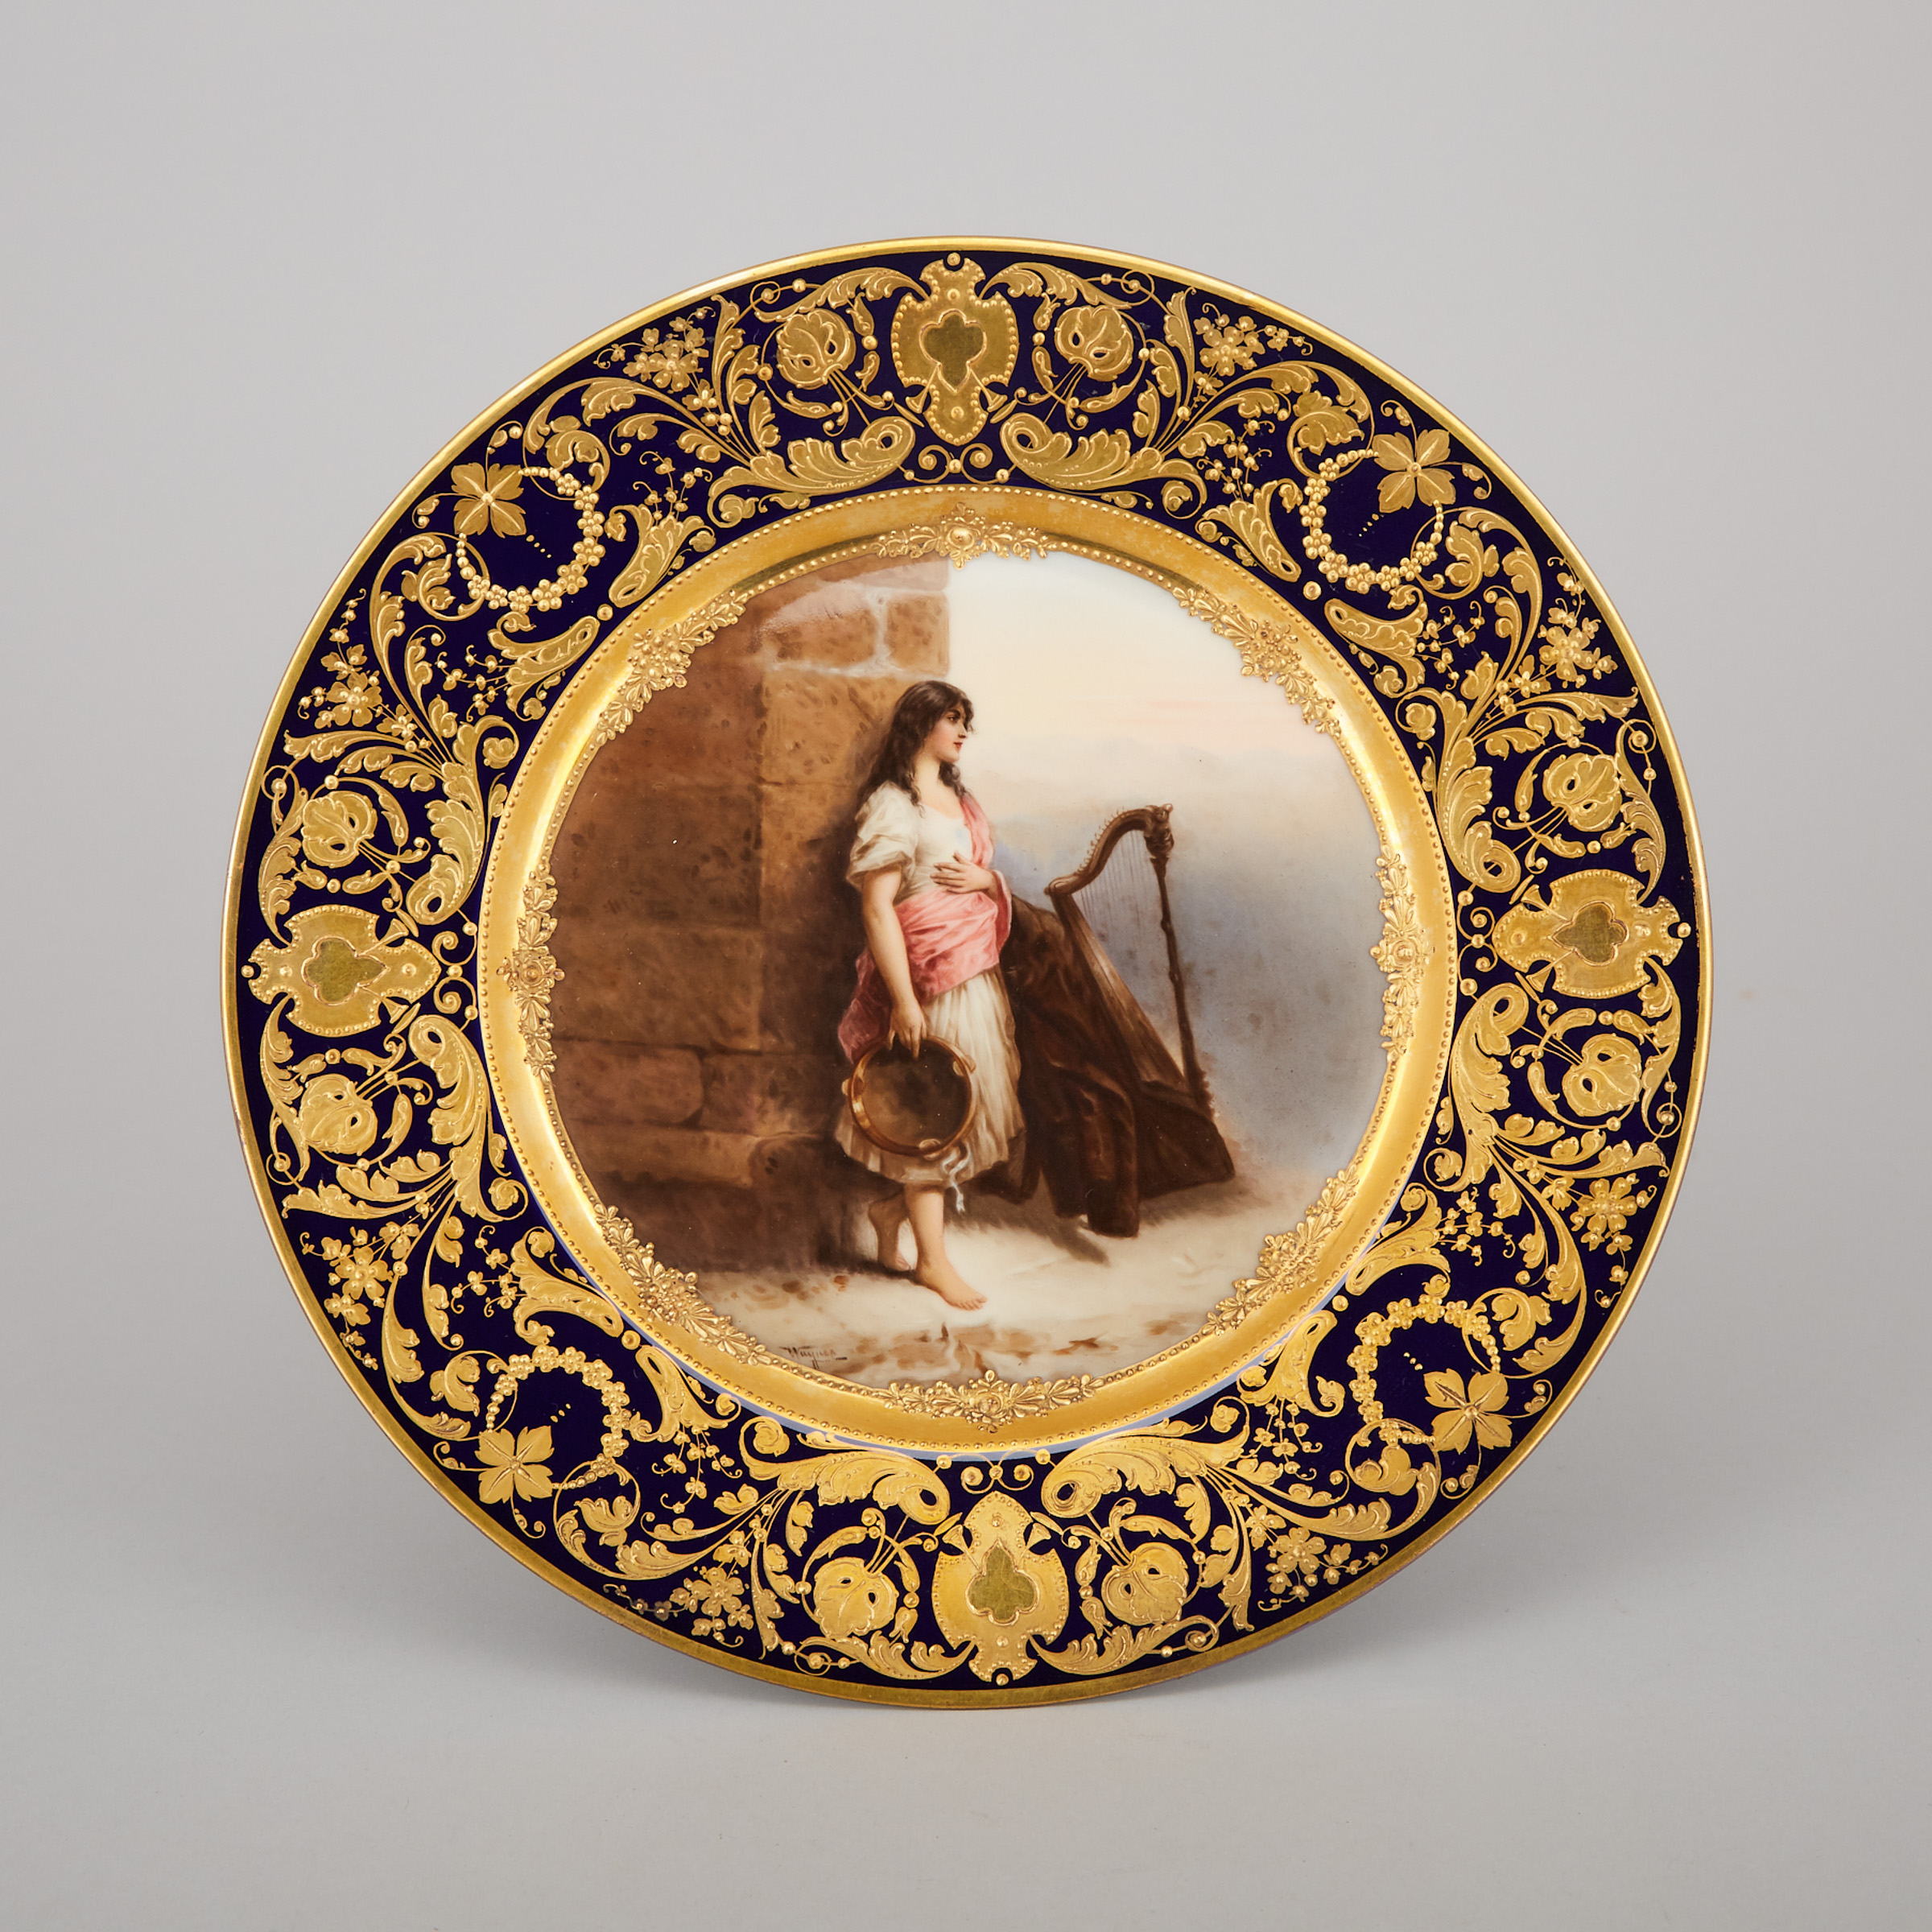 Dresden 'Vienna' Cabinet Plate, 'Heimatlos', after William Kray, early 20th century